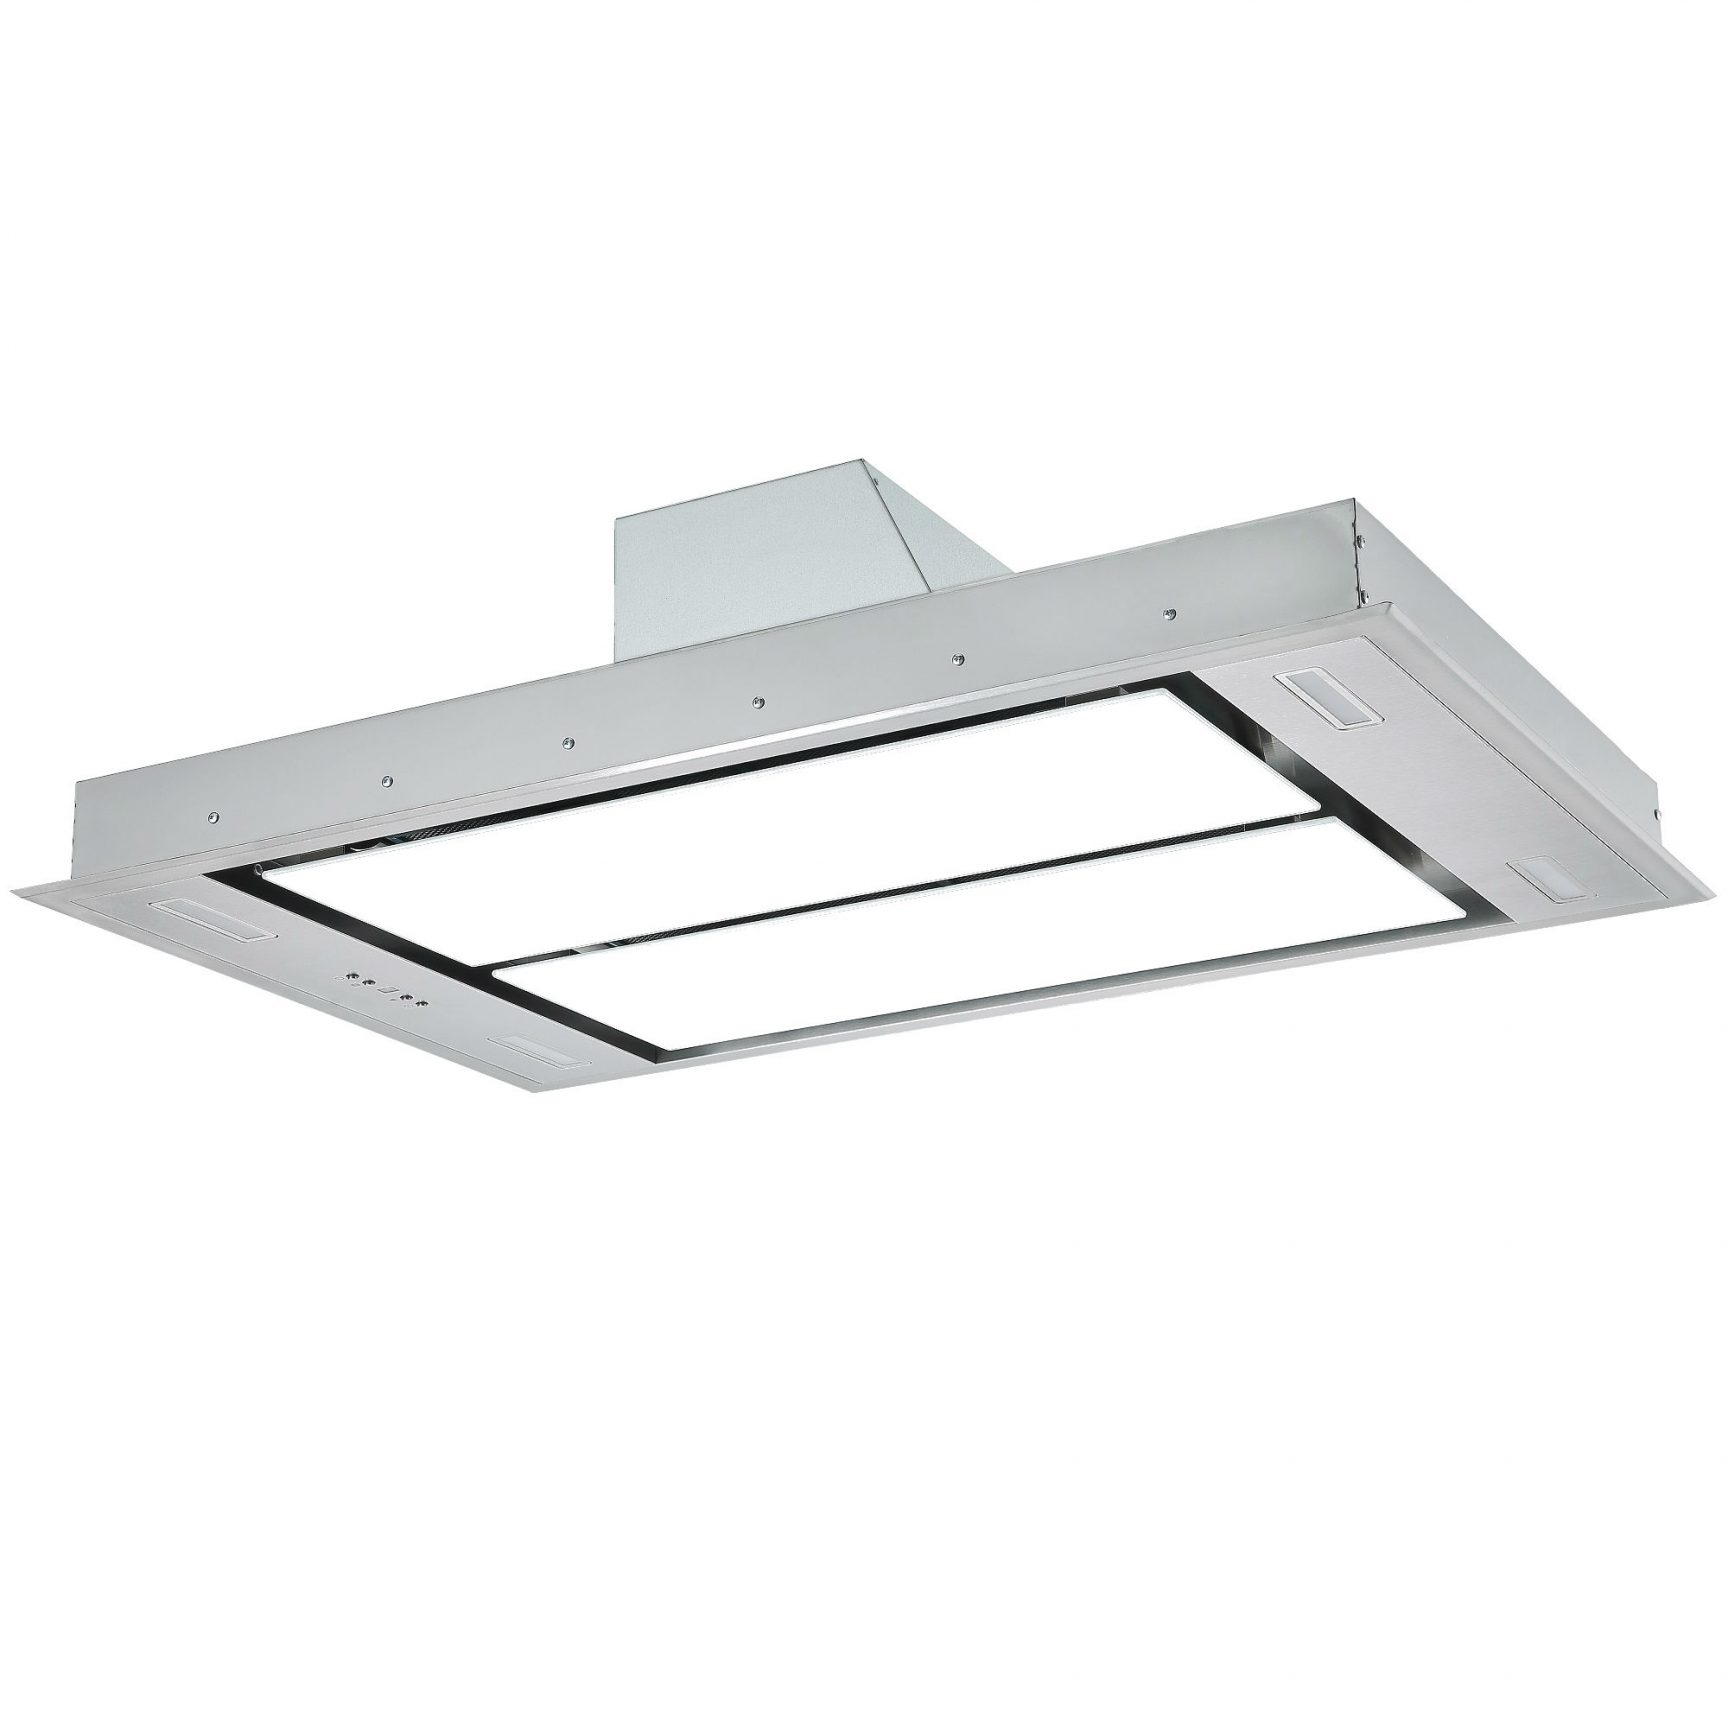 Cookology 110cm Ceiling Extractor Hood - White Glass Panel & Stainless ...